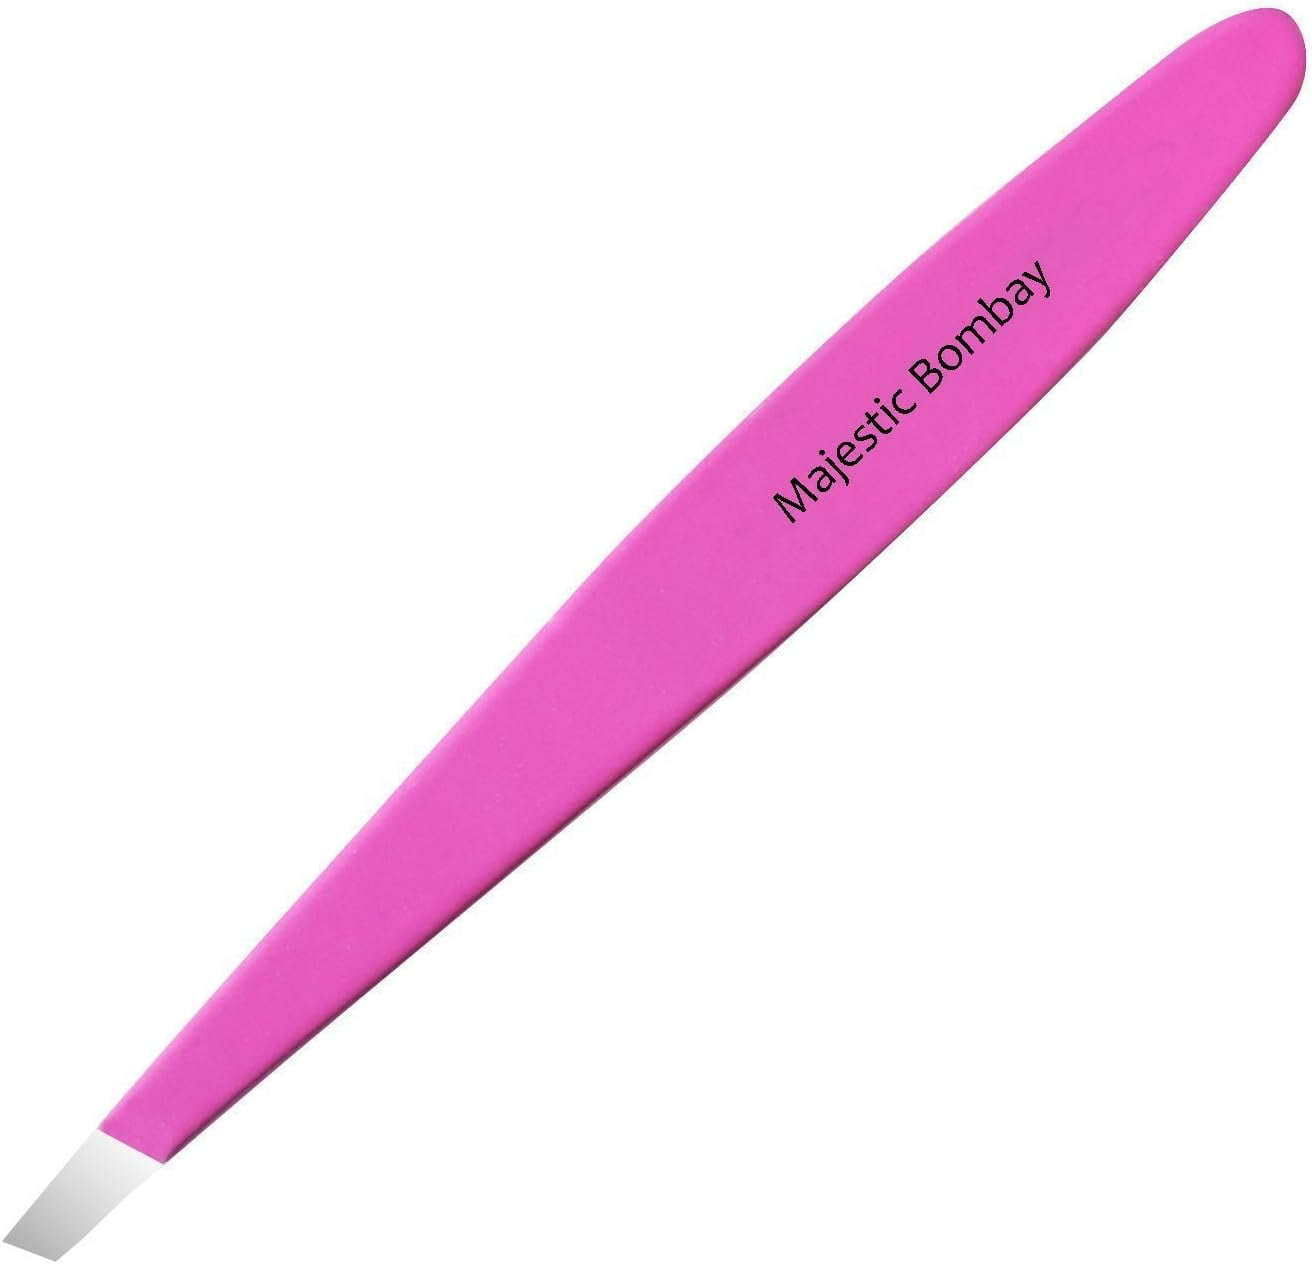 Majestic Bombay Stainless Steel Slant Tweezers for Women and Men, Pink ...